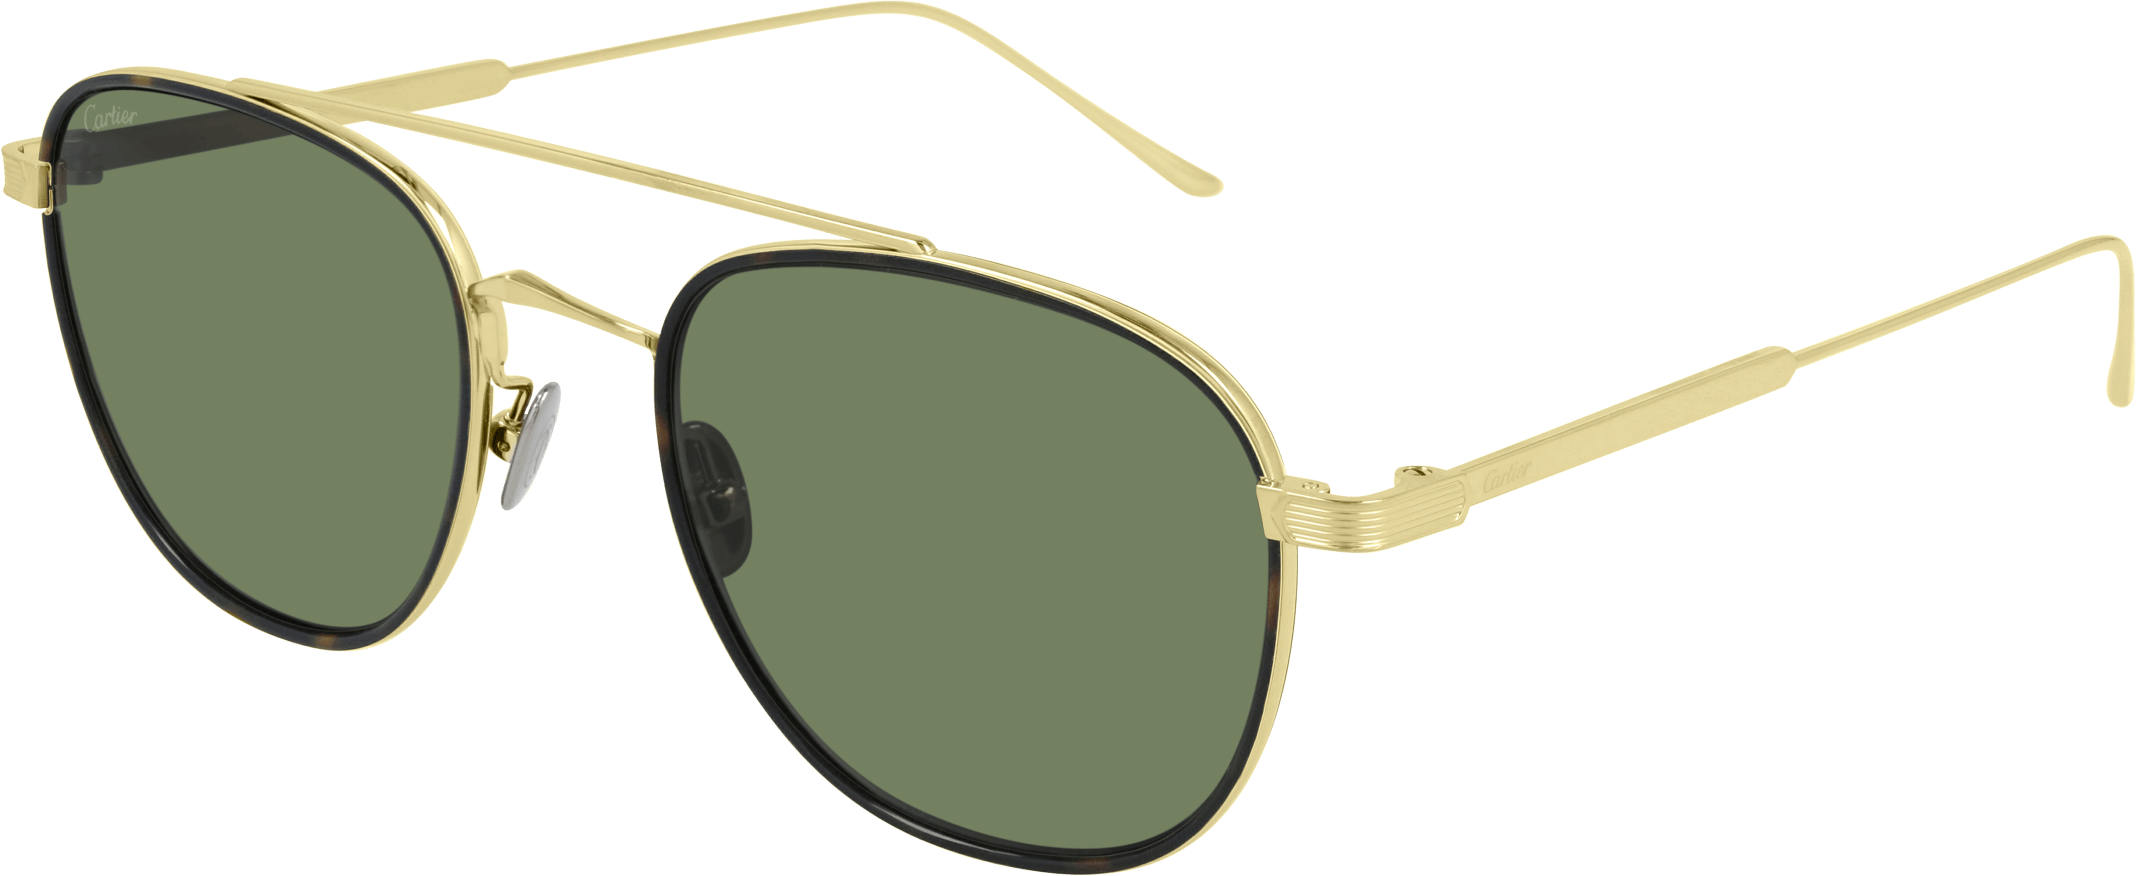 Color_CT0251S-006 - GOLD - GREEN - AR (ANTI REFLECTIVE) - POLARIZED